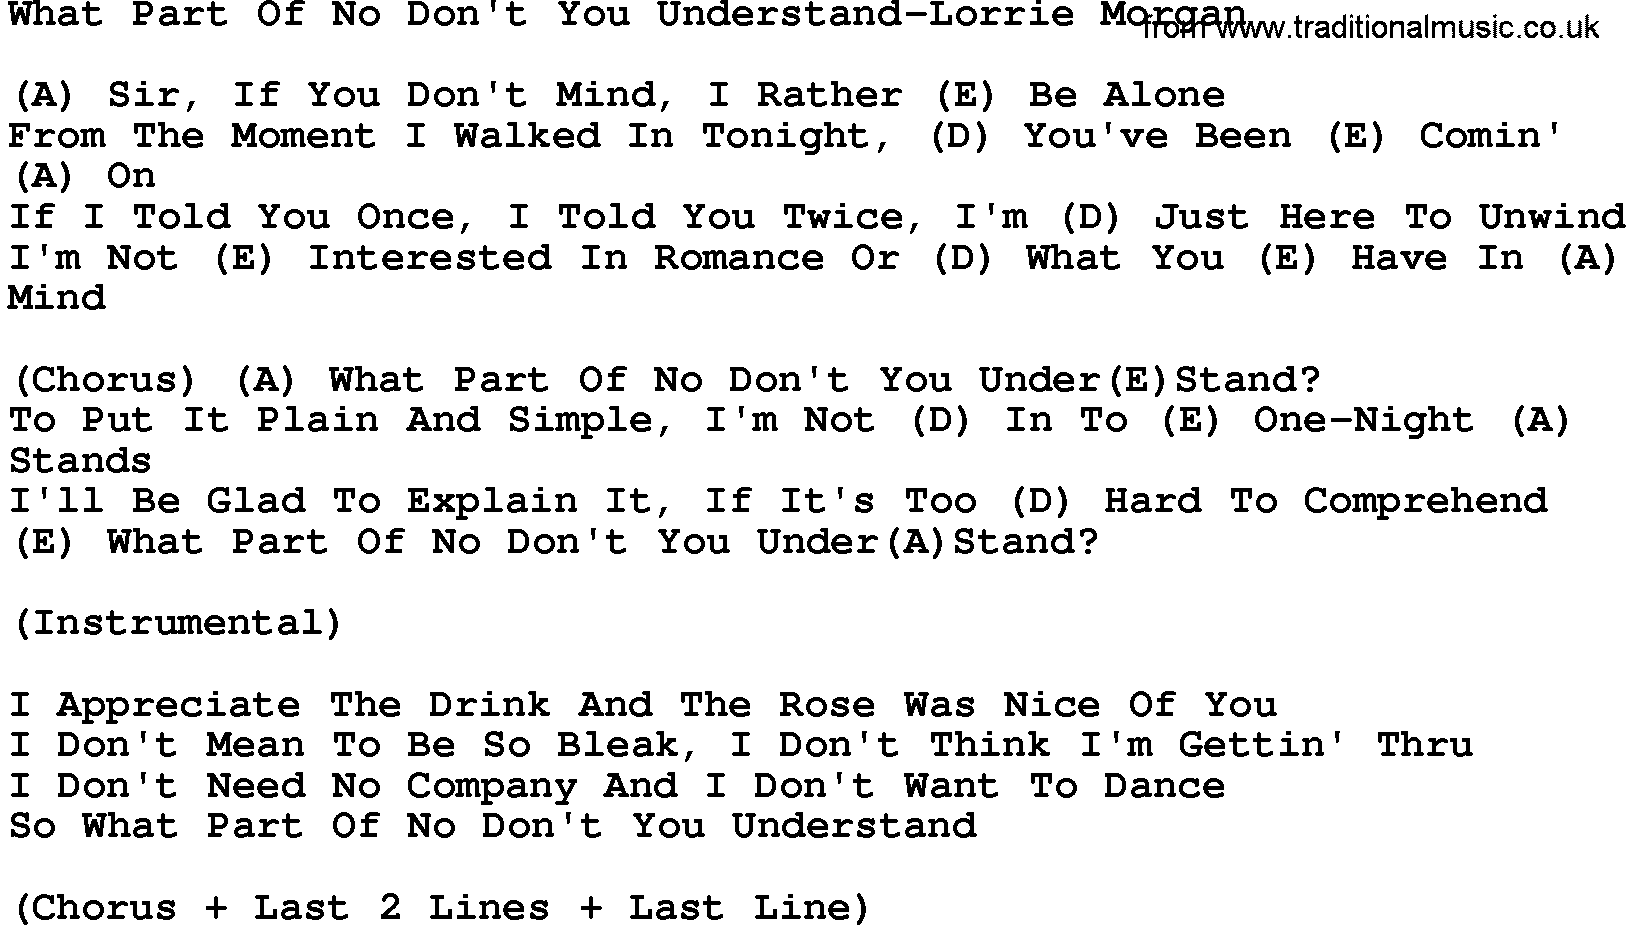 Country music song: What Part Of No Don't You Understand-Lorrie Morgan lyrics and chords